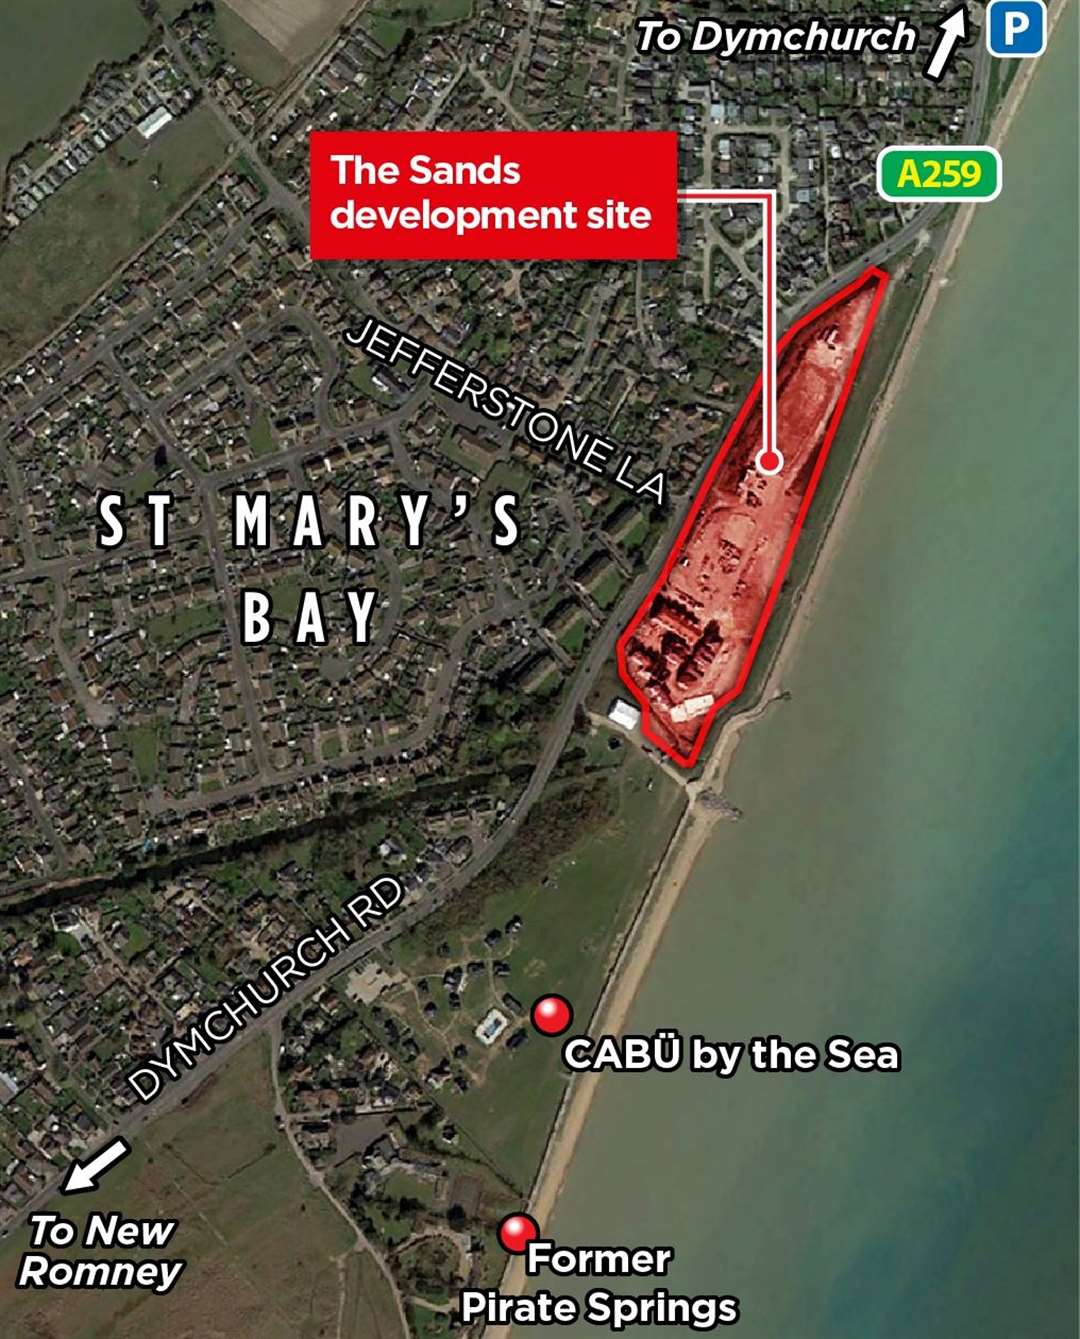 The Sands site is off the A259 Dymchurch Road